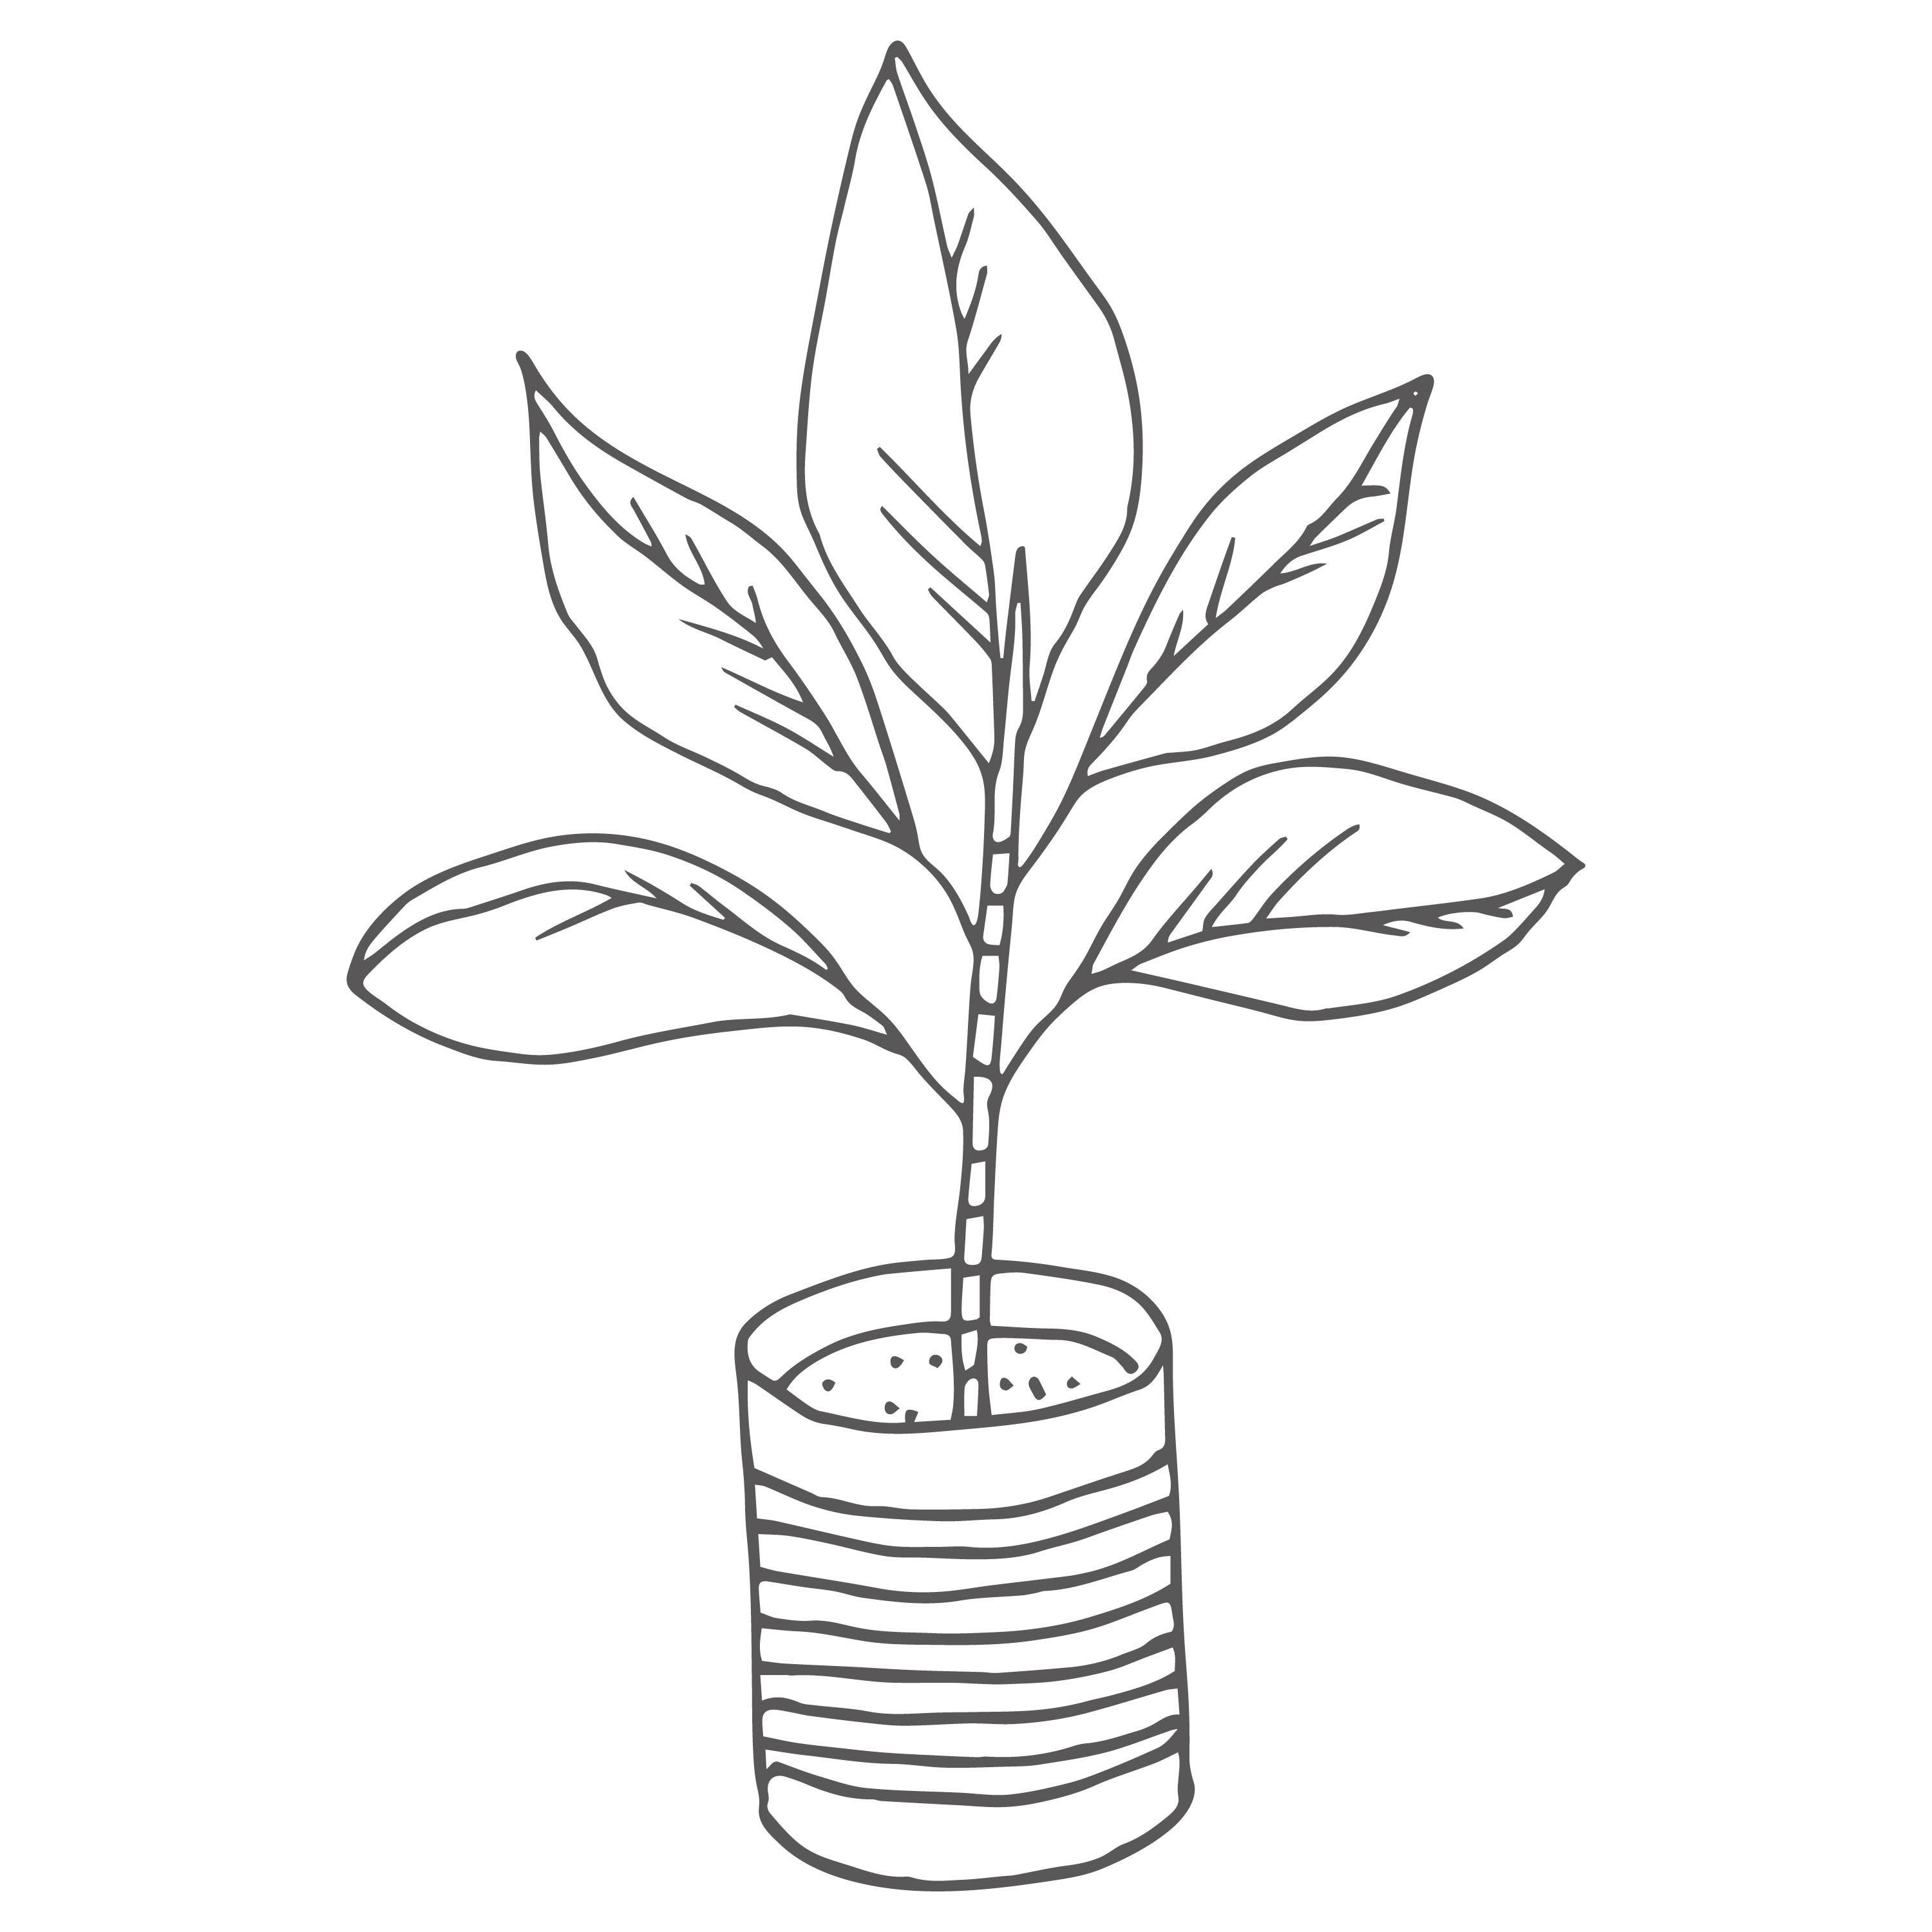 A potted plant design